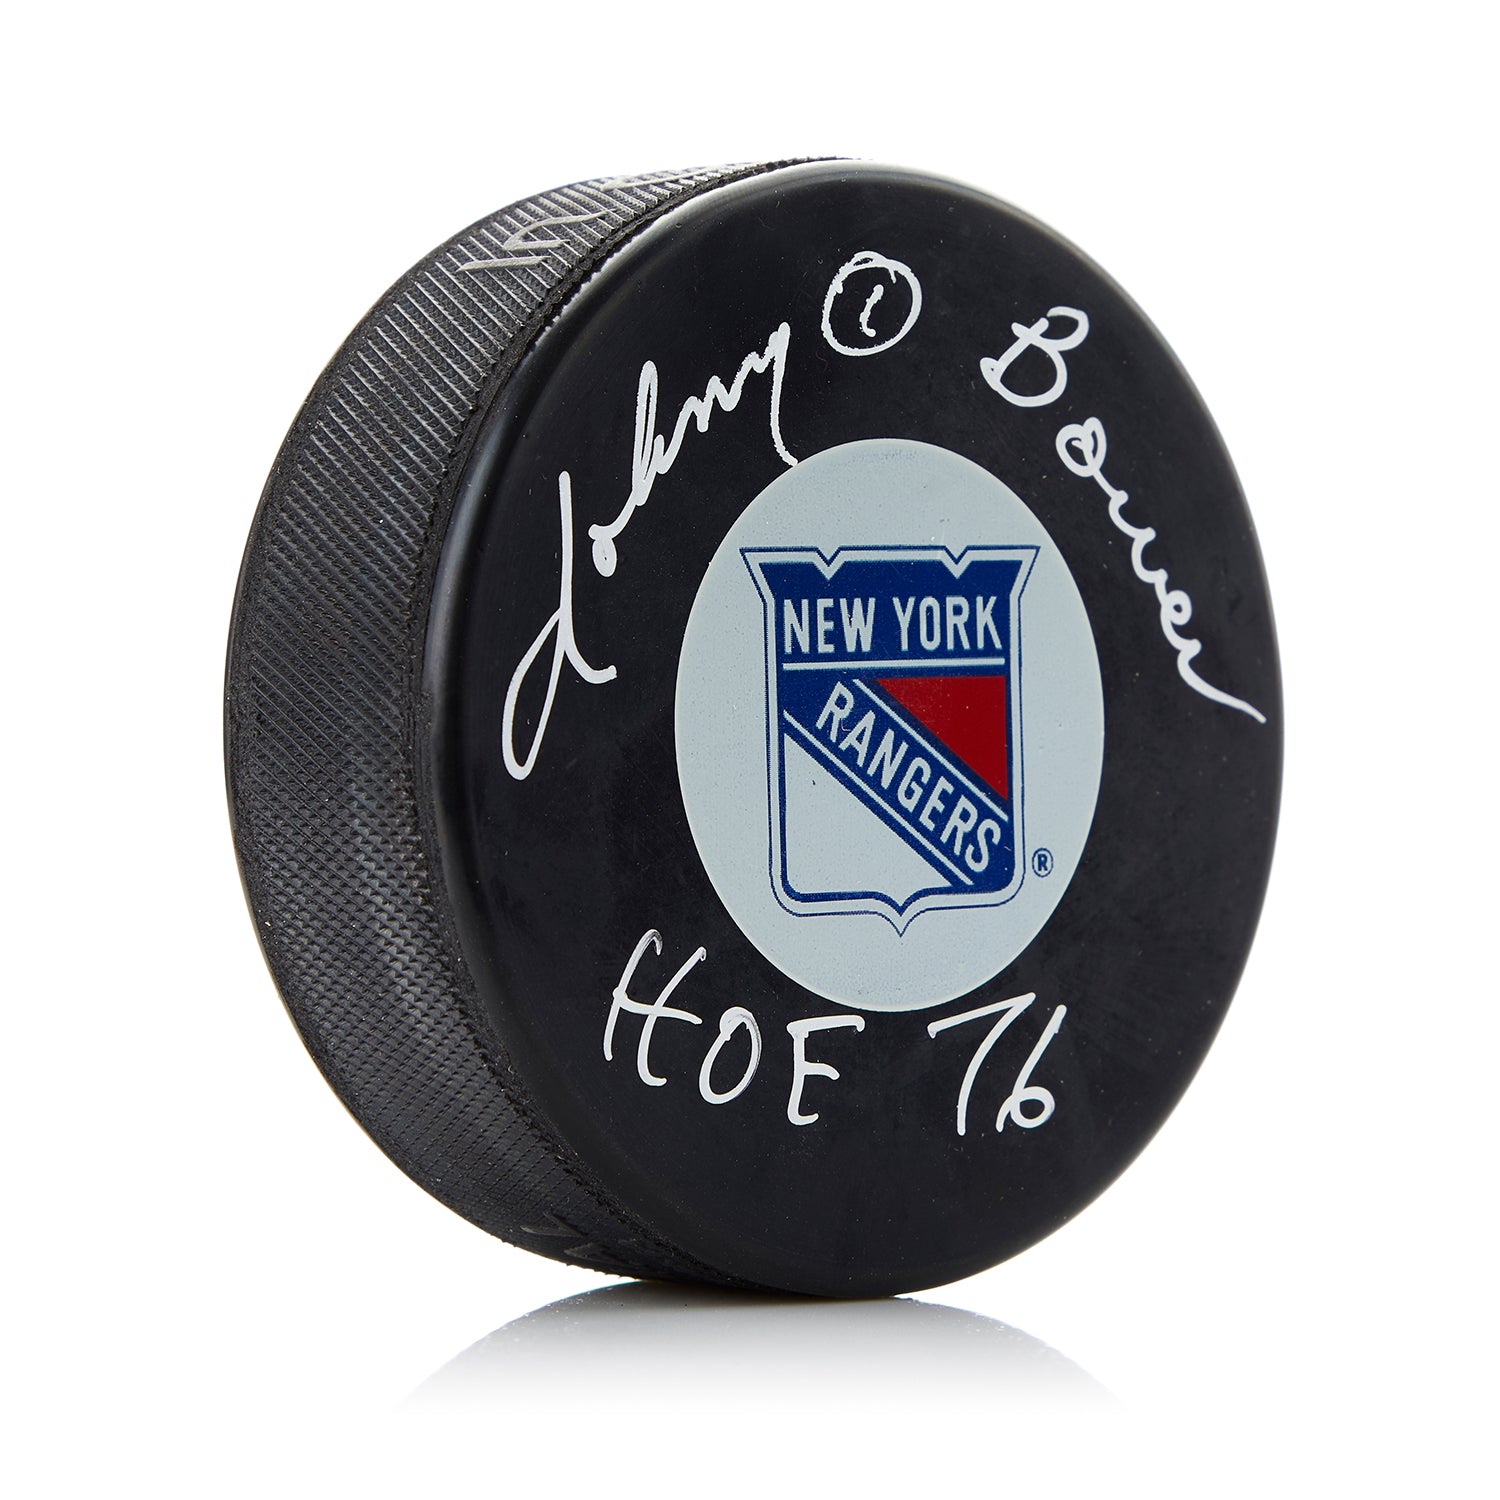 Johnny Bower New York Rangers Autographed Hockey Puck with HOF Note